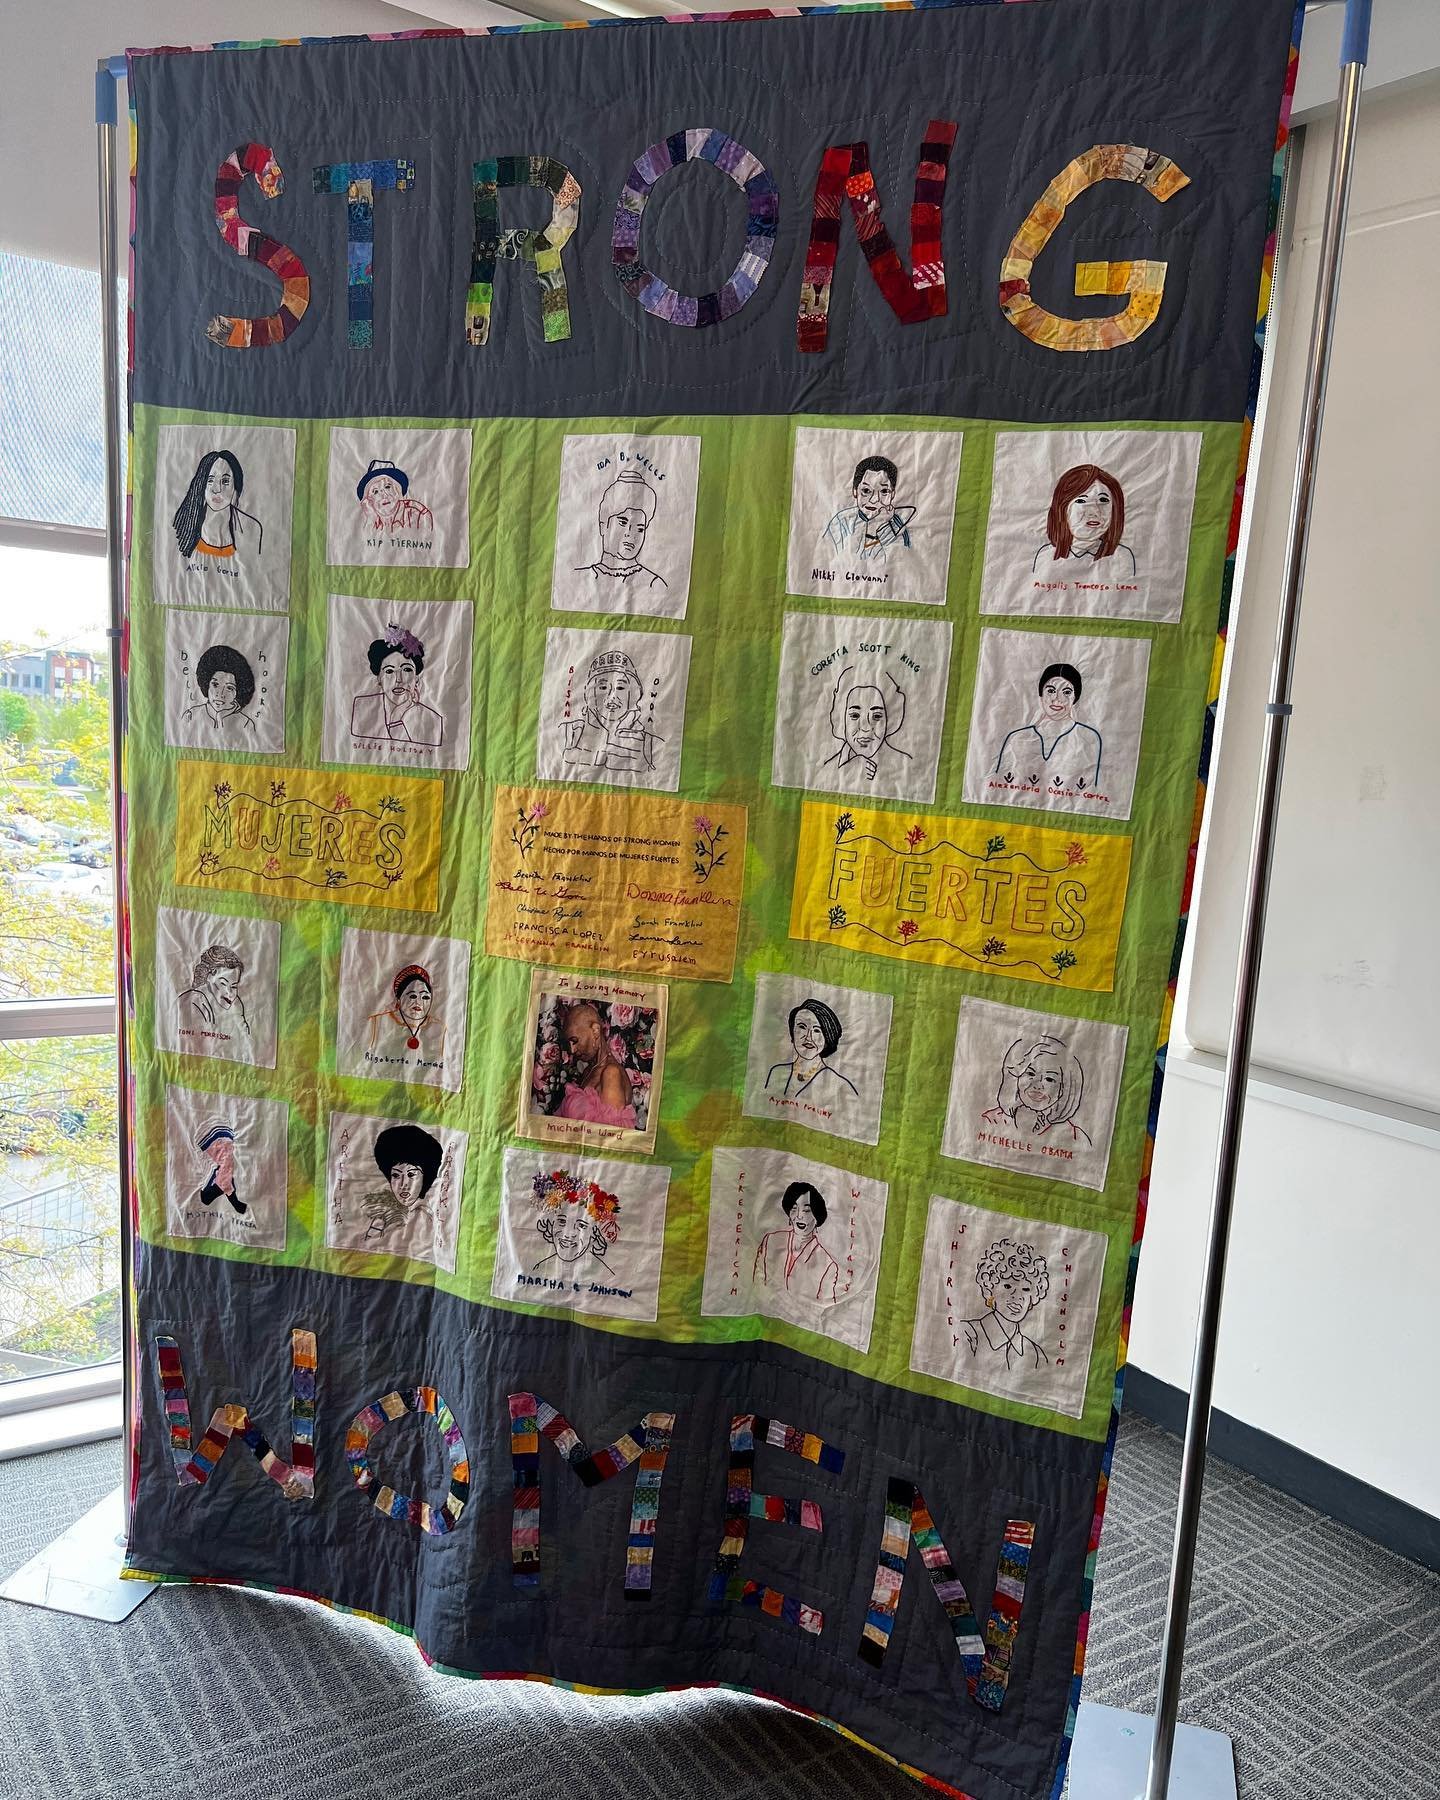 The Crafting Change group got to show our Strong Womenn quilt at Whittier&rsquo;s Mother&rsquo;s Day Brunch today! So fun to finally see it hanging after working on it over the last 6 (!) years. #CraftingChange #CommunityArtTherapy #ArtTherapy #Quilt